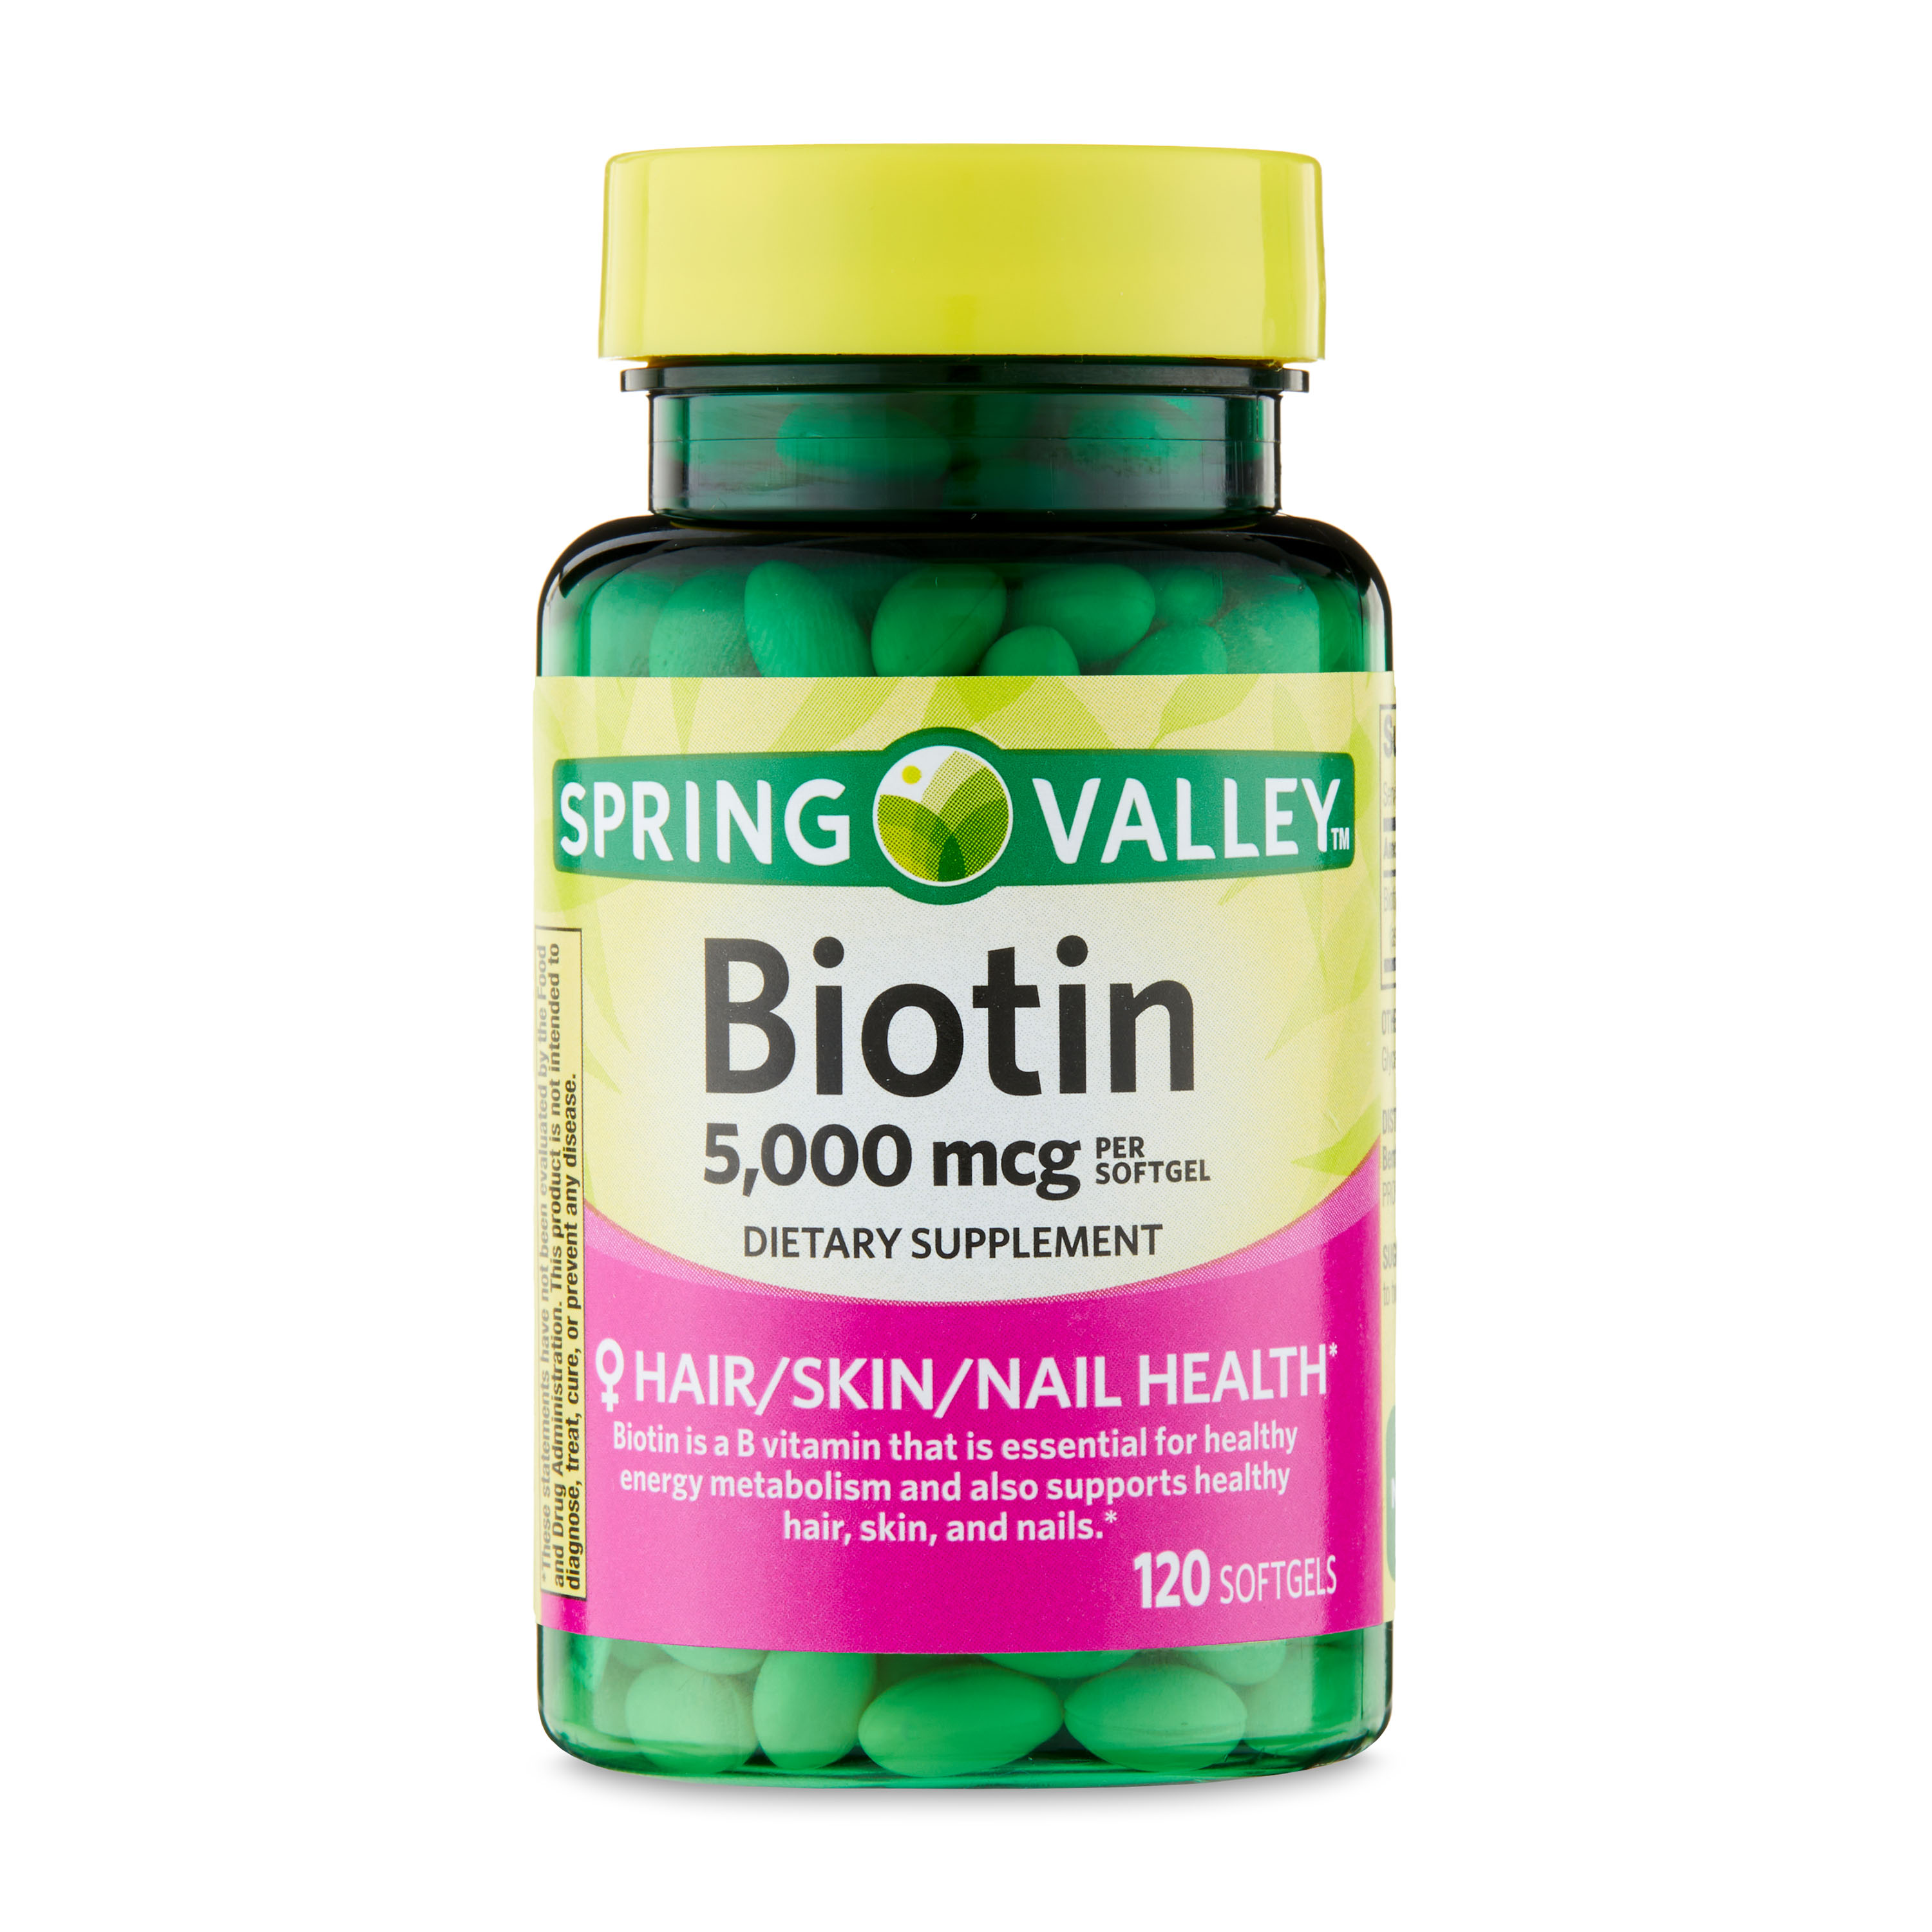 Spring Valley Biotin Hair/Skin/Nails Health Dietary Supplement Softgels, 5,000 mcg, 120 Count - image 1 of 16